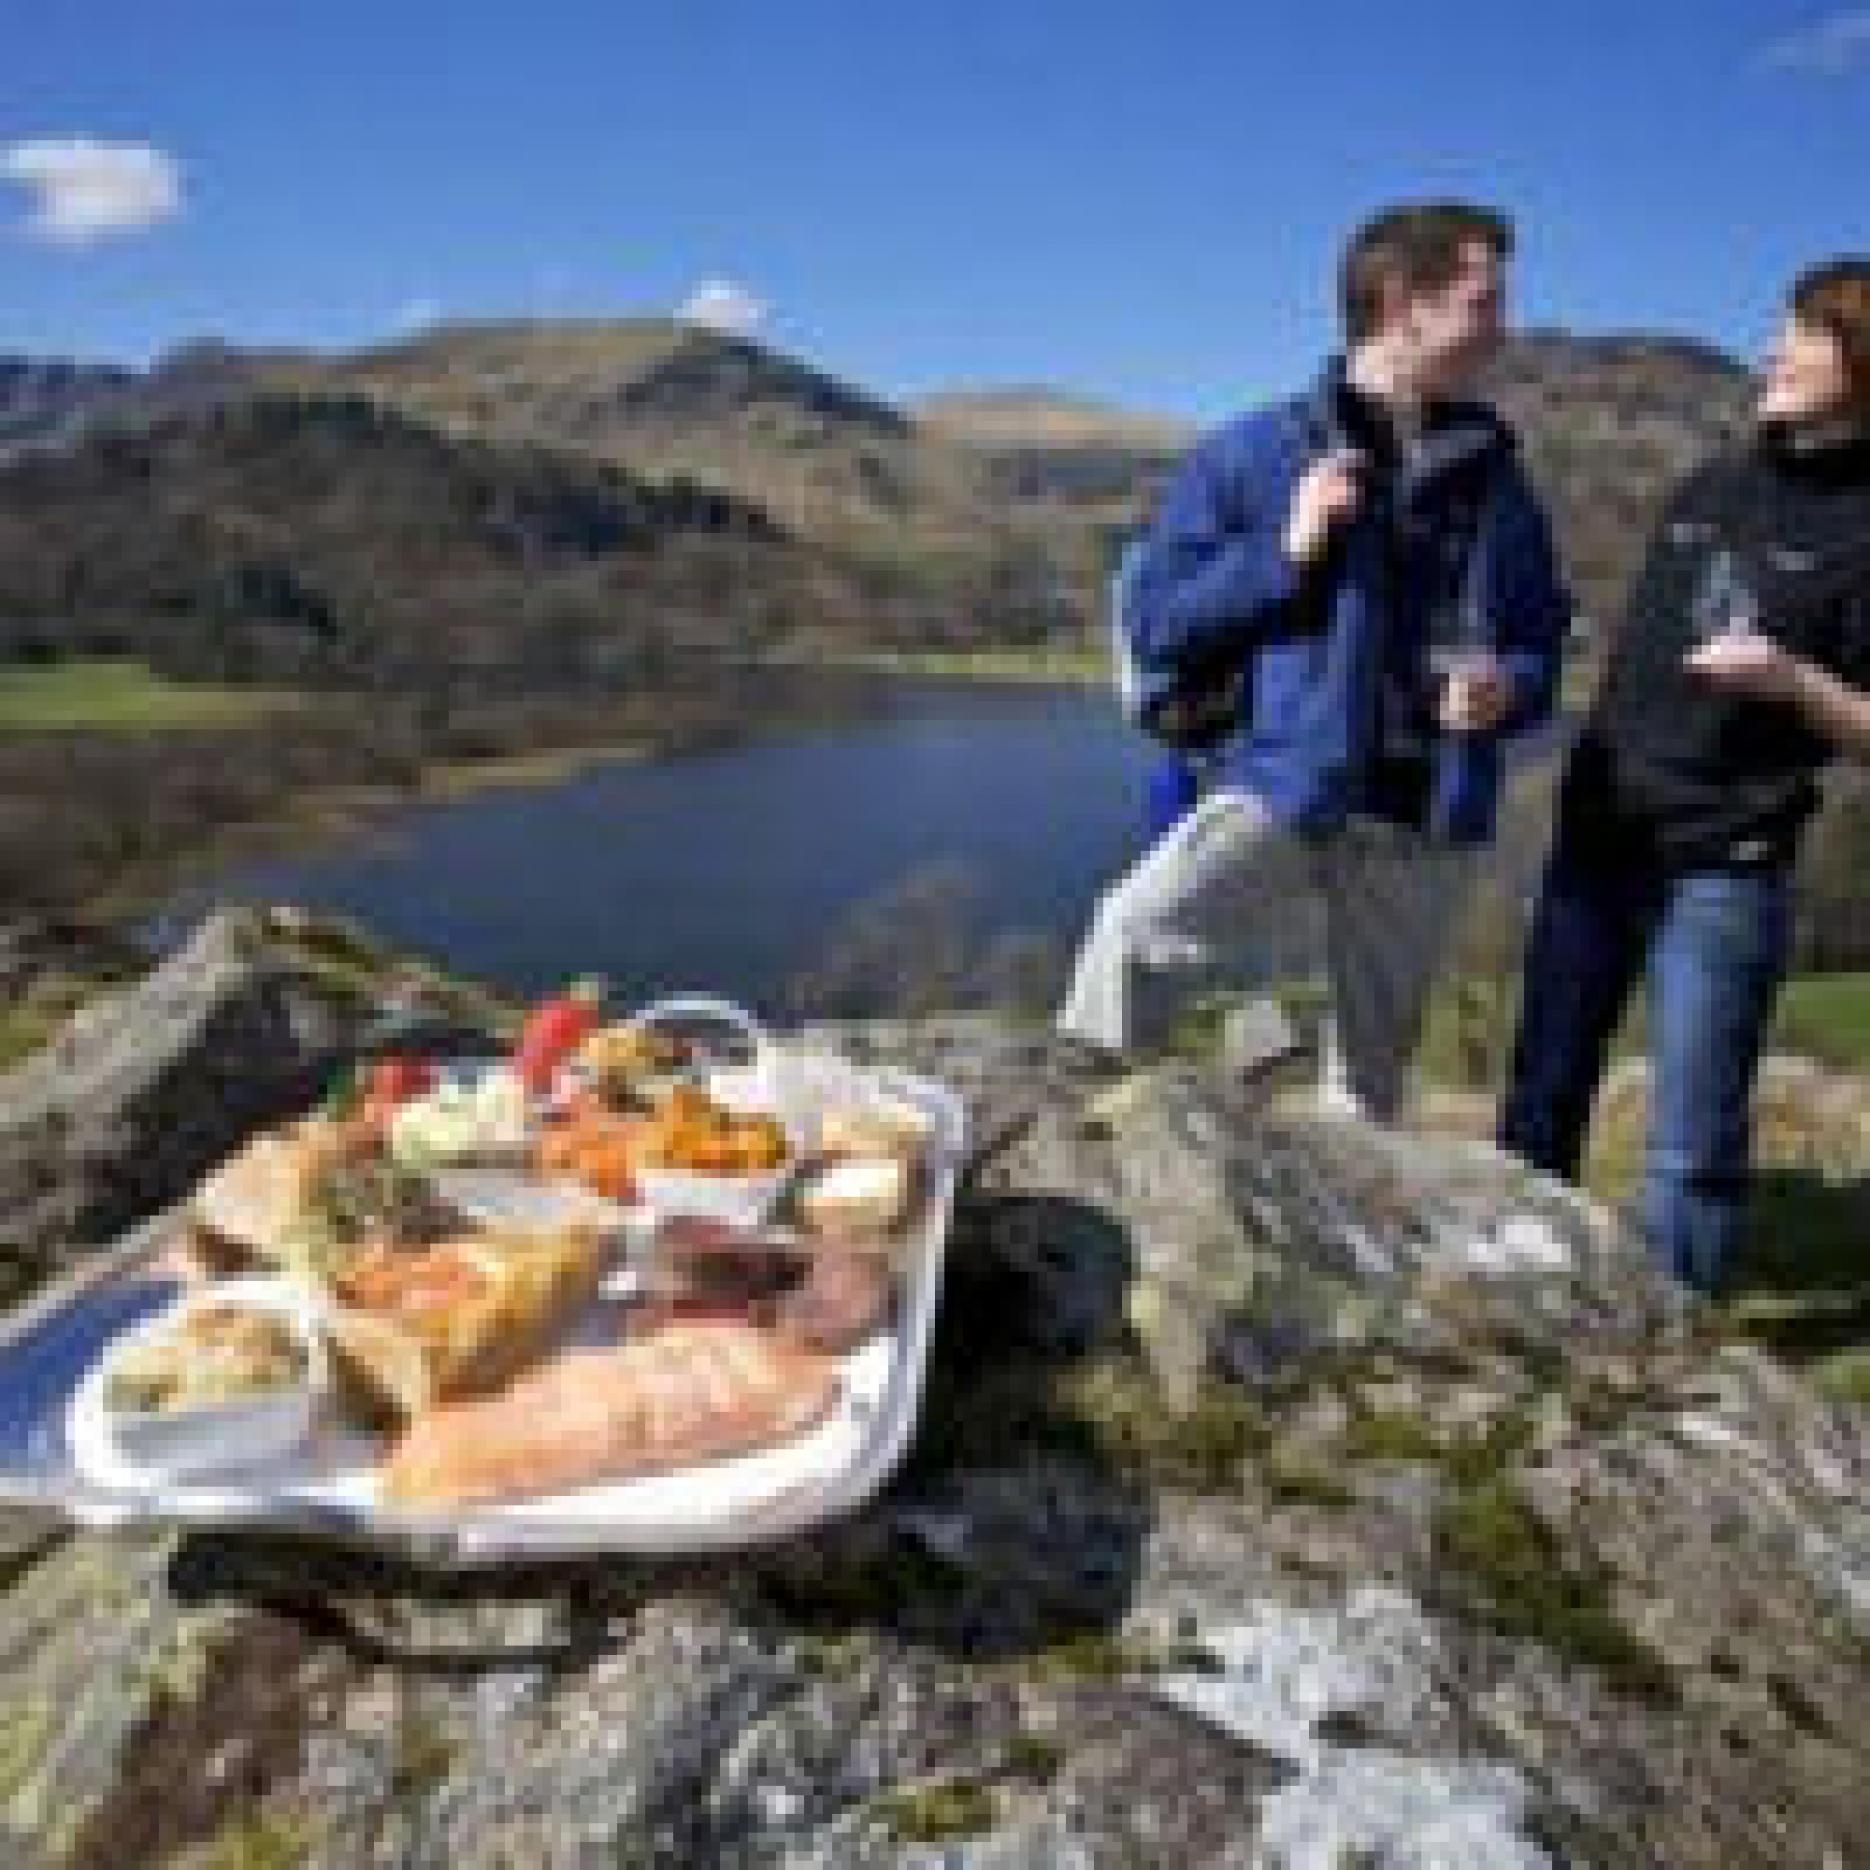 Packed lunches served up at Lake District restaurant | Craft Guild of Chefs